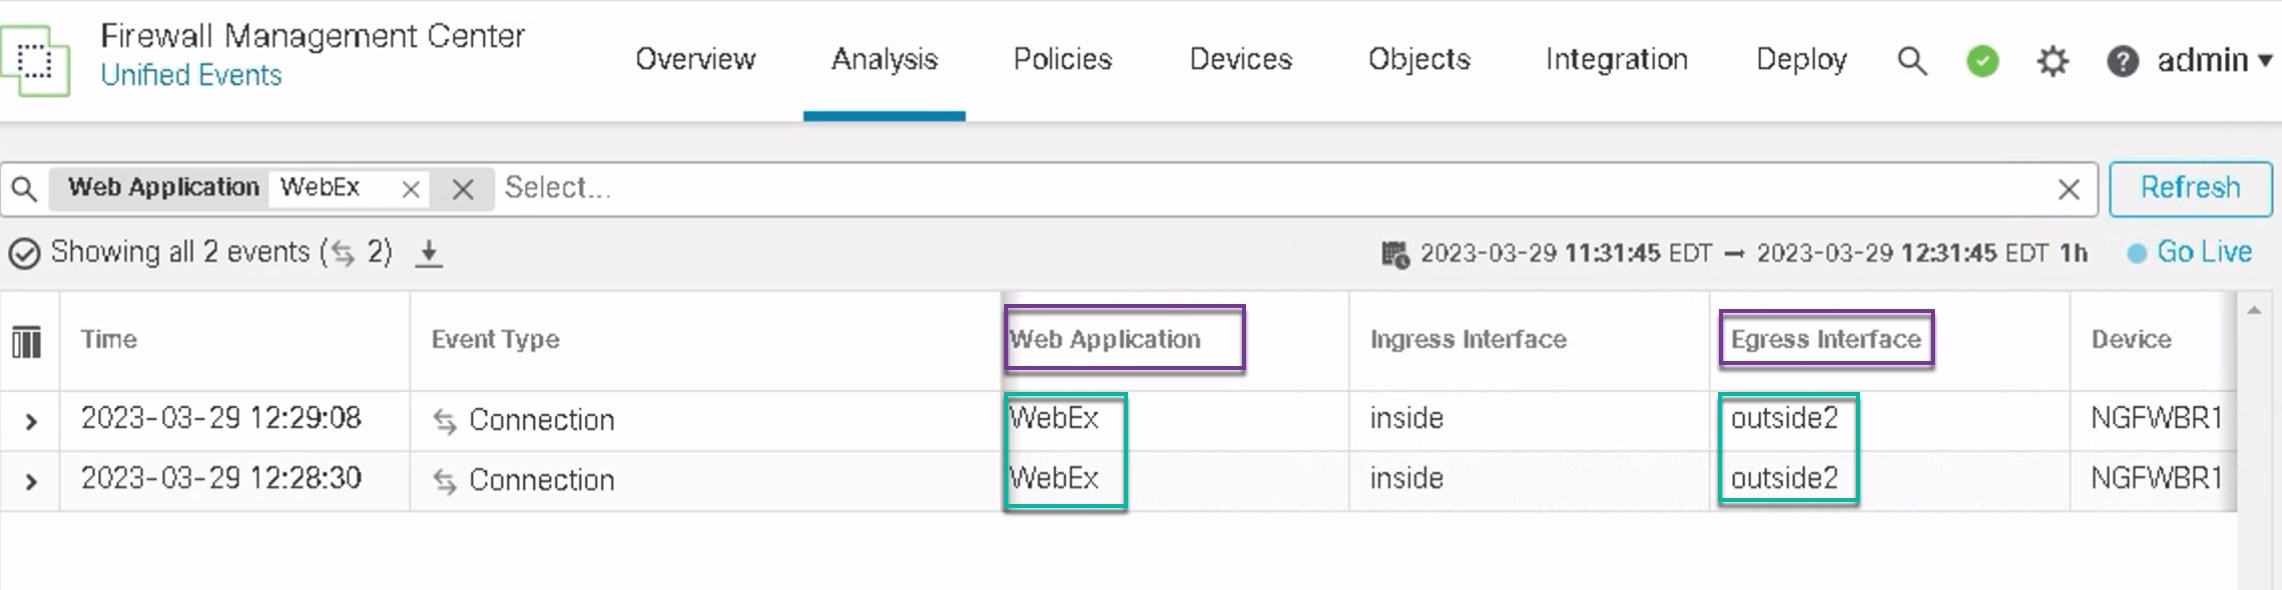 In the image, WebEx application traffic is sent out through the outside2 interface as there is packet loss on the outside3 interface as seen on the Unified events page.